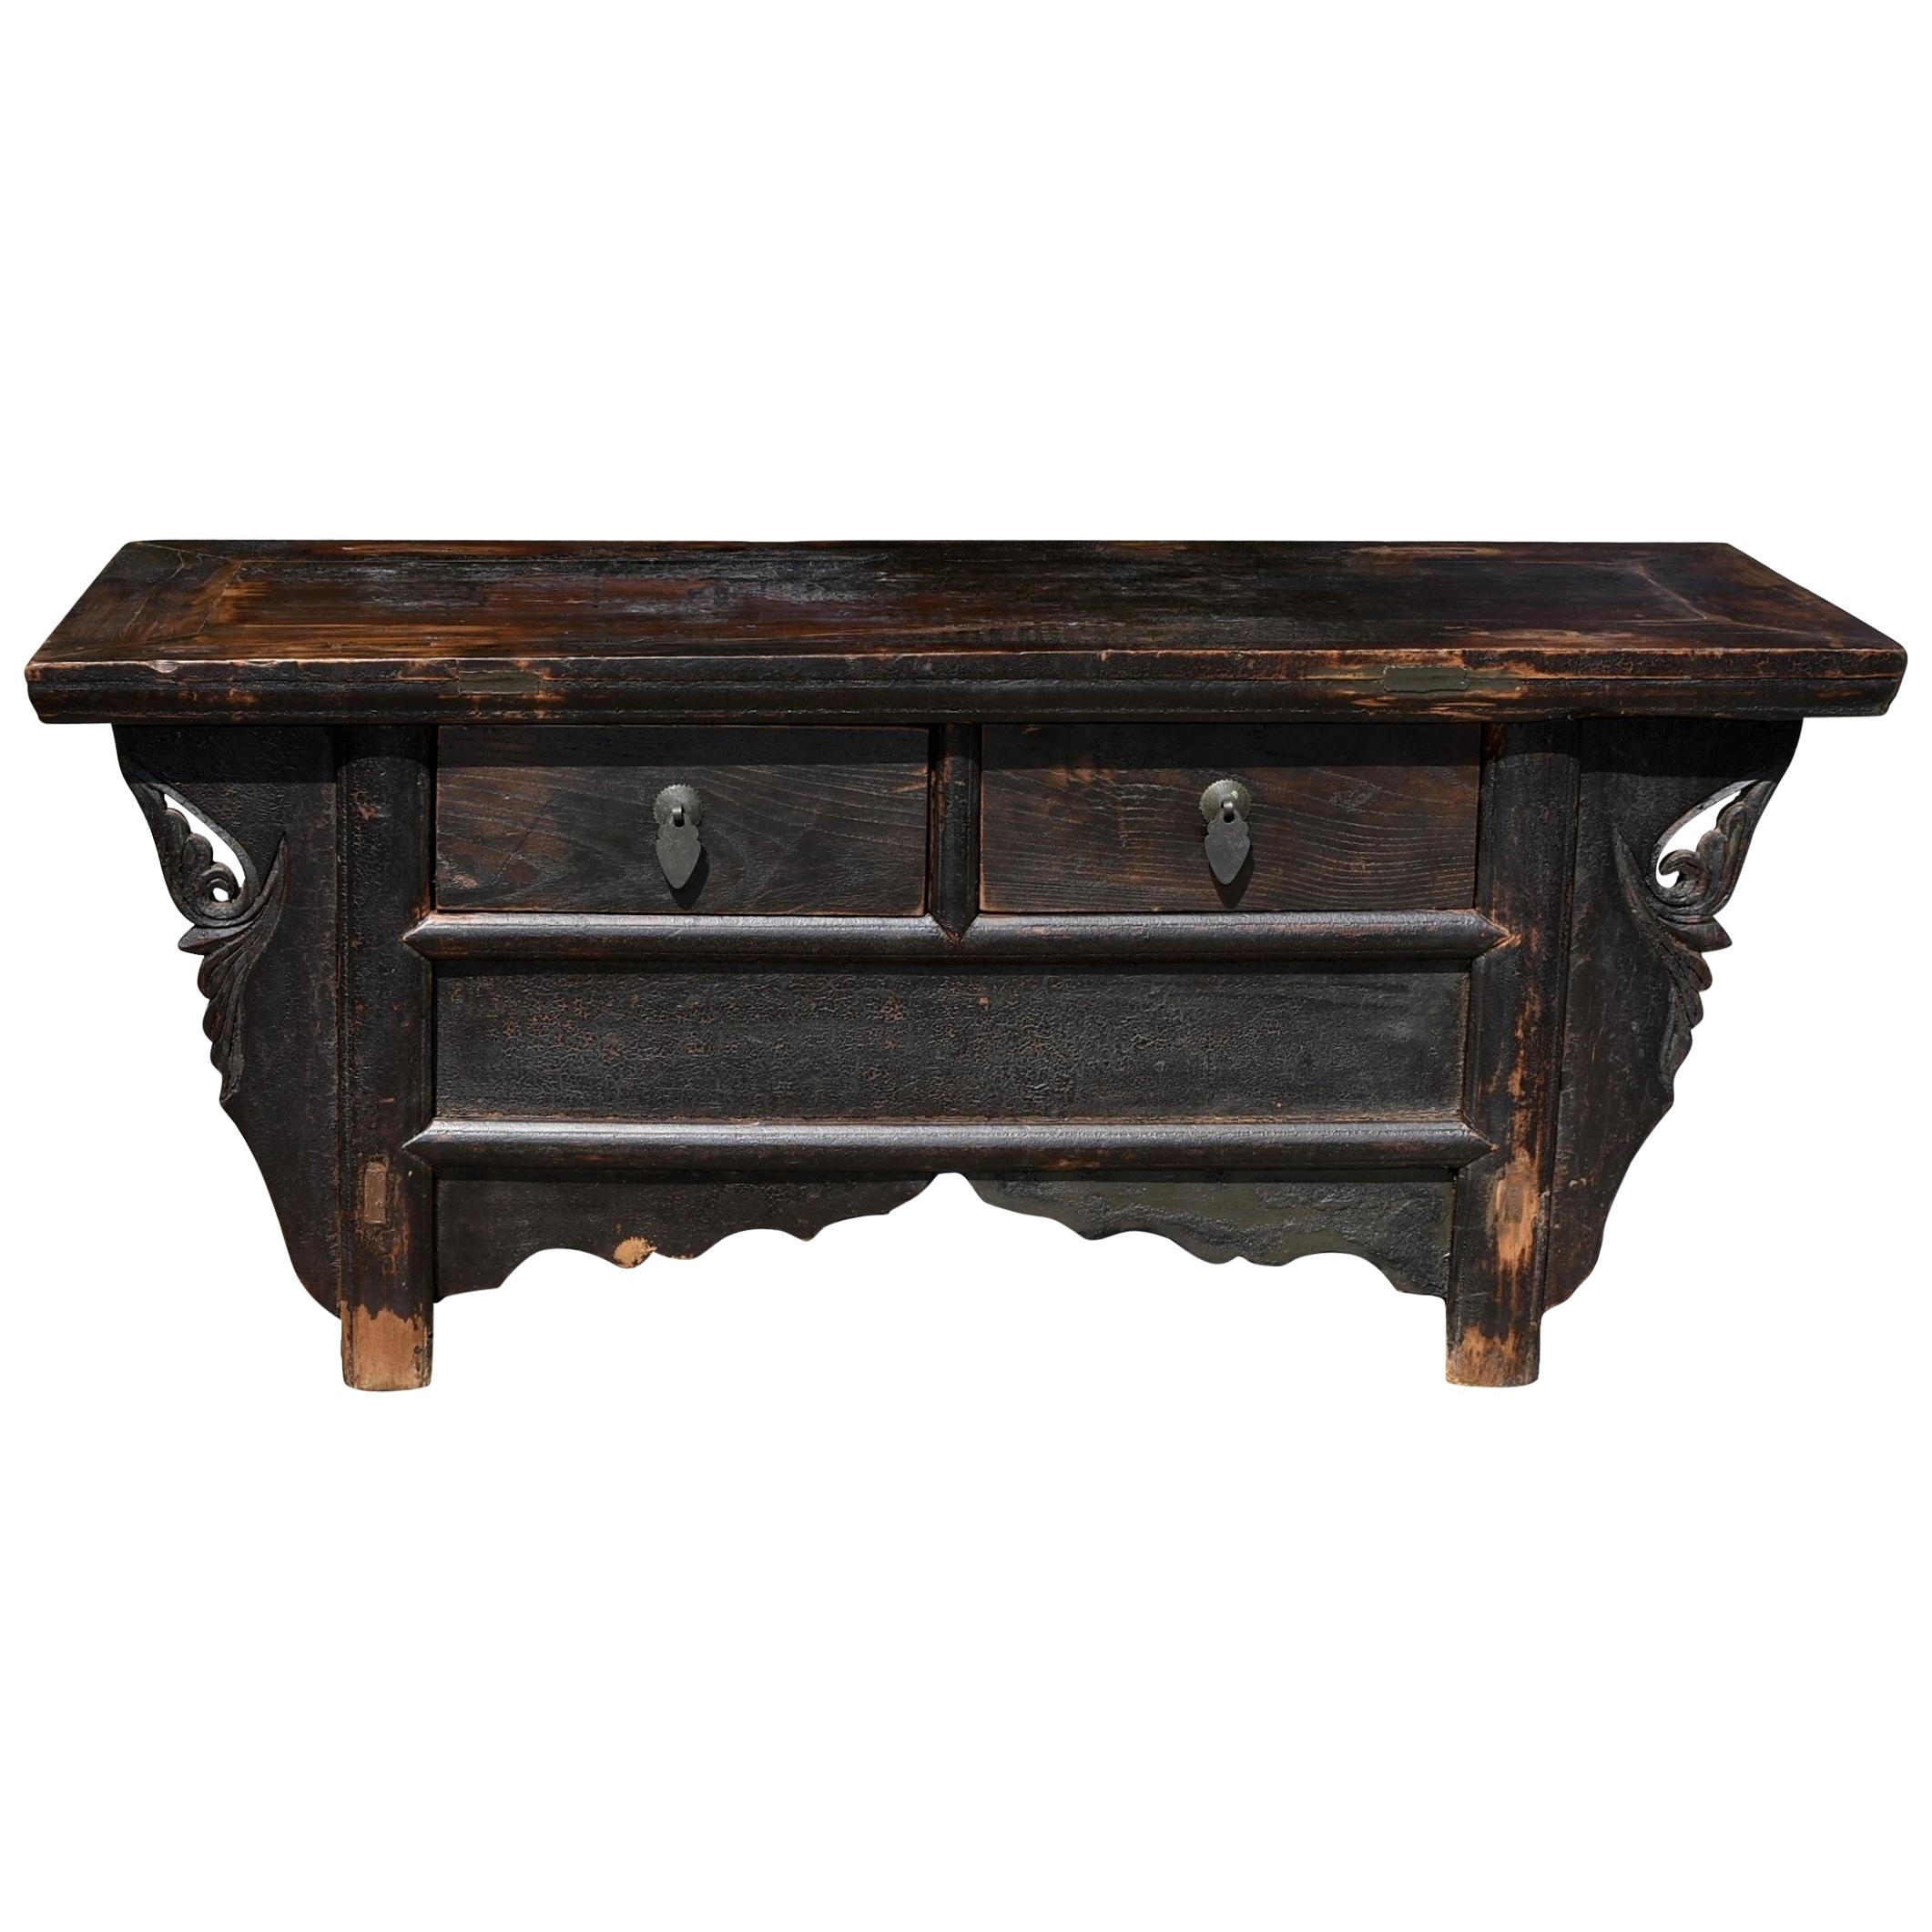 Low Meditation Table Chest with Secret Compartment, Chinese Antique